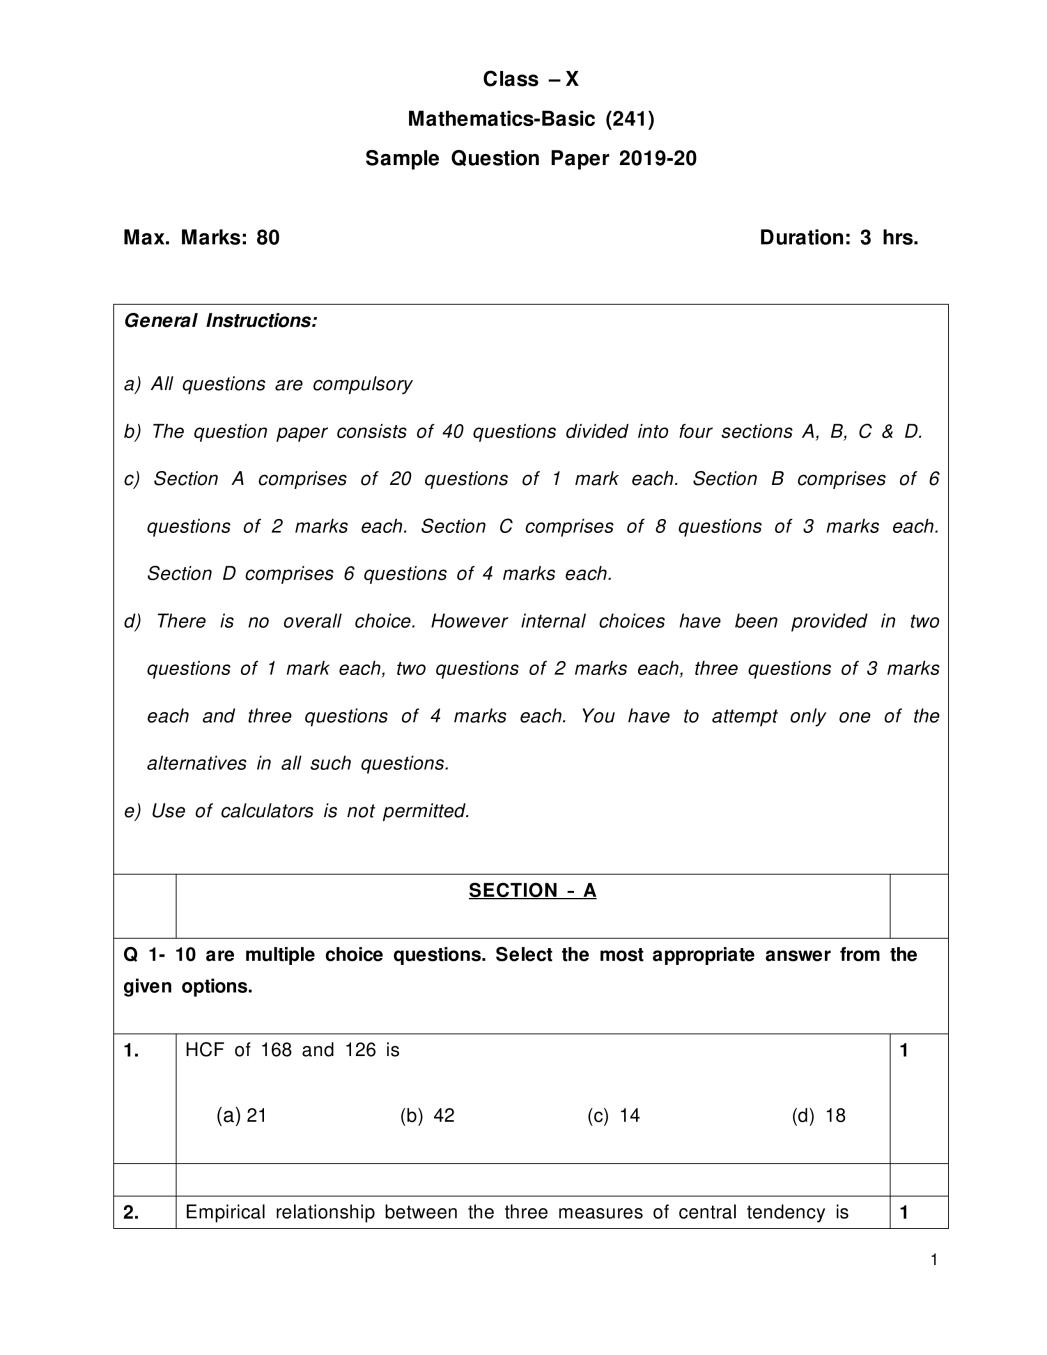 CBSE Class 10 Sample Paper 2020 for Mathematics Basic - Page 1